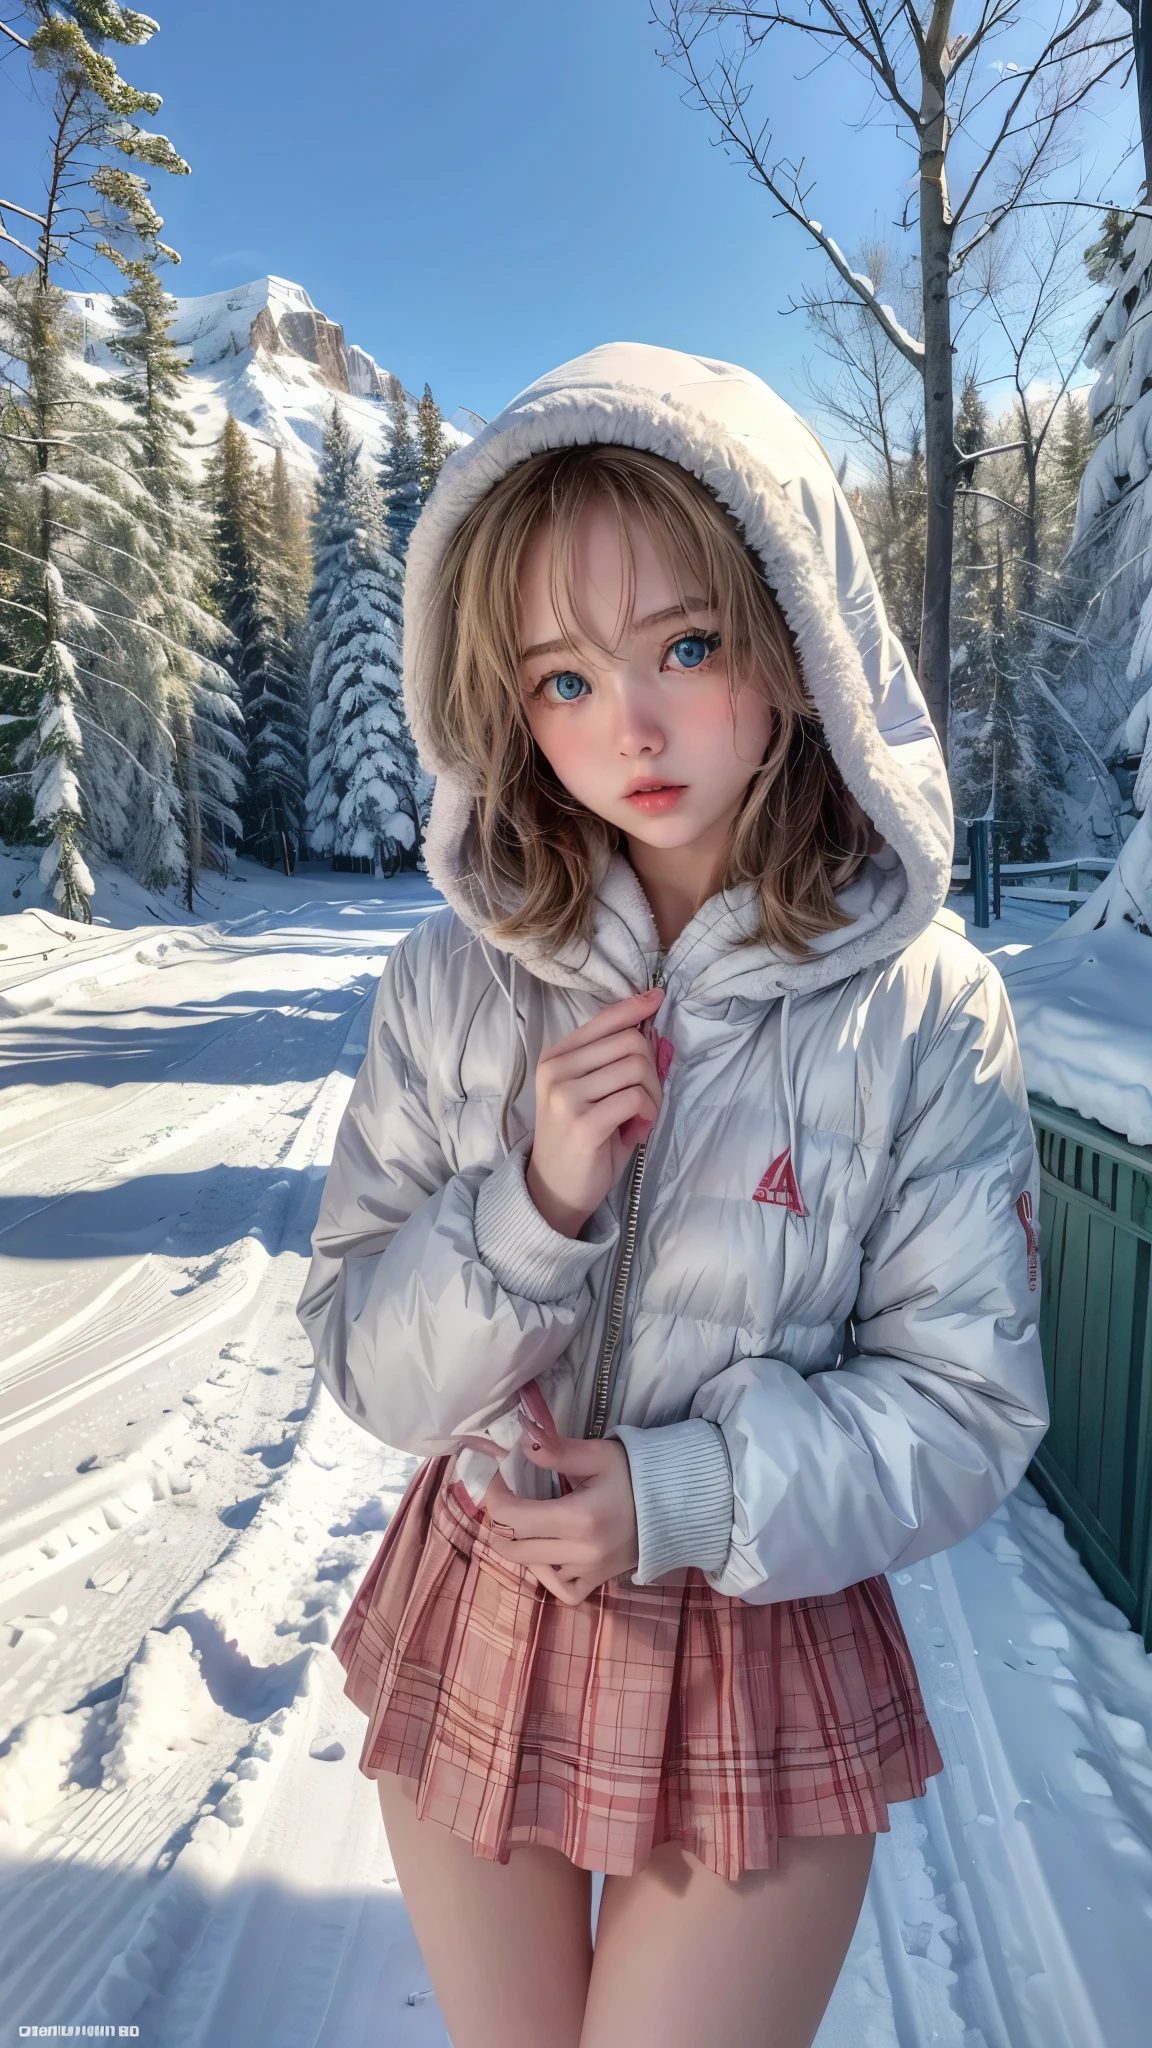 ((RAW photo, masterpiece, 16k, high detail, realistic, absurdres, uhd, wallpaper, best quality)), 1 girl, playful, winter outfit, snowy, super cute, , Russian, age 12, sexy, perfect eyes, blue eyes, no makeup, blonde hair, hood, flat chest, slim, athletic, small butt, standing, background mountain with snow, trees, ski landing
 